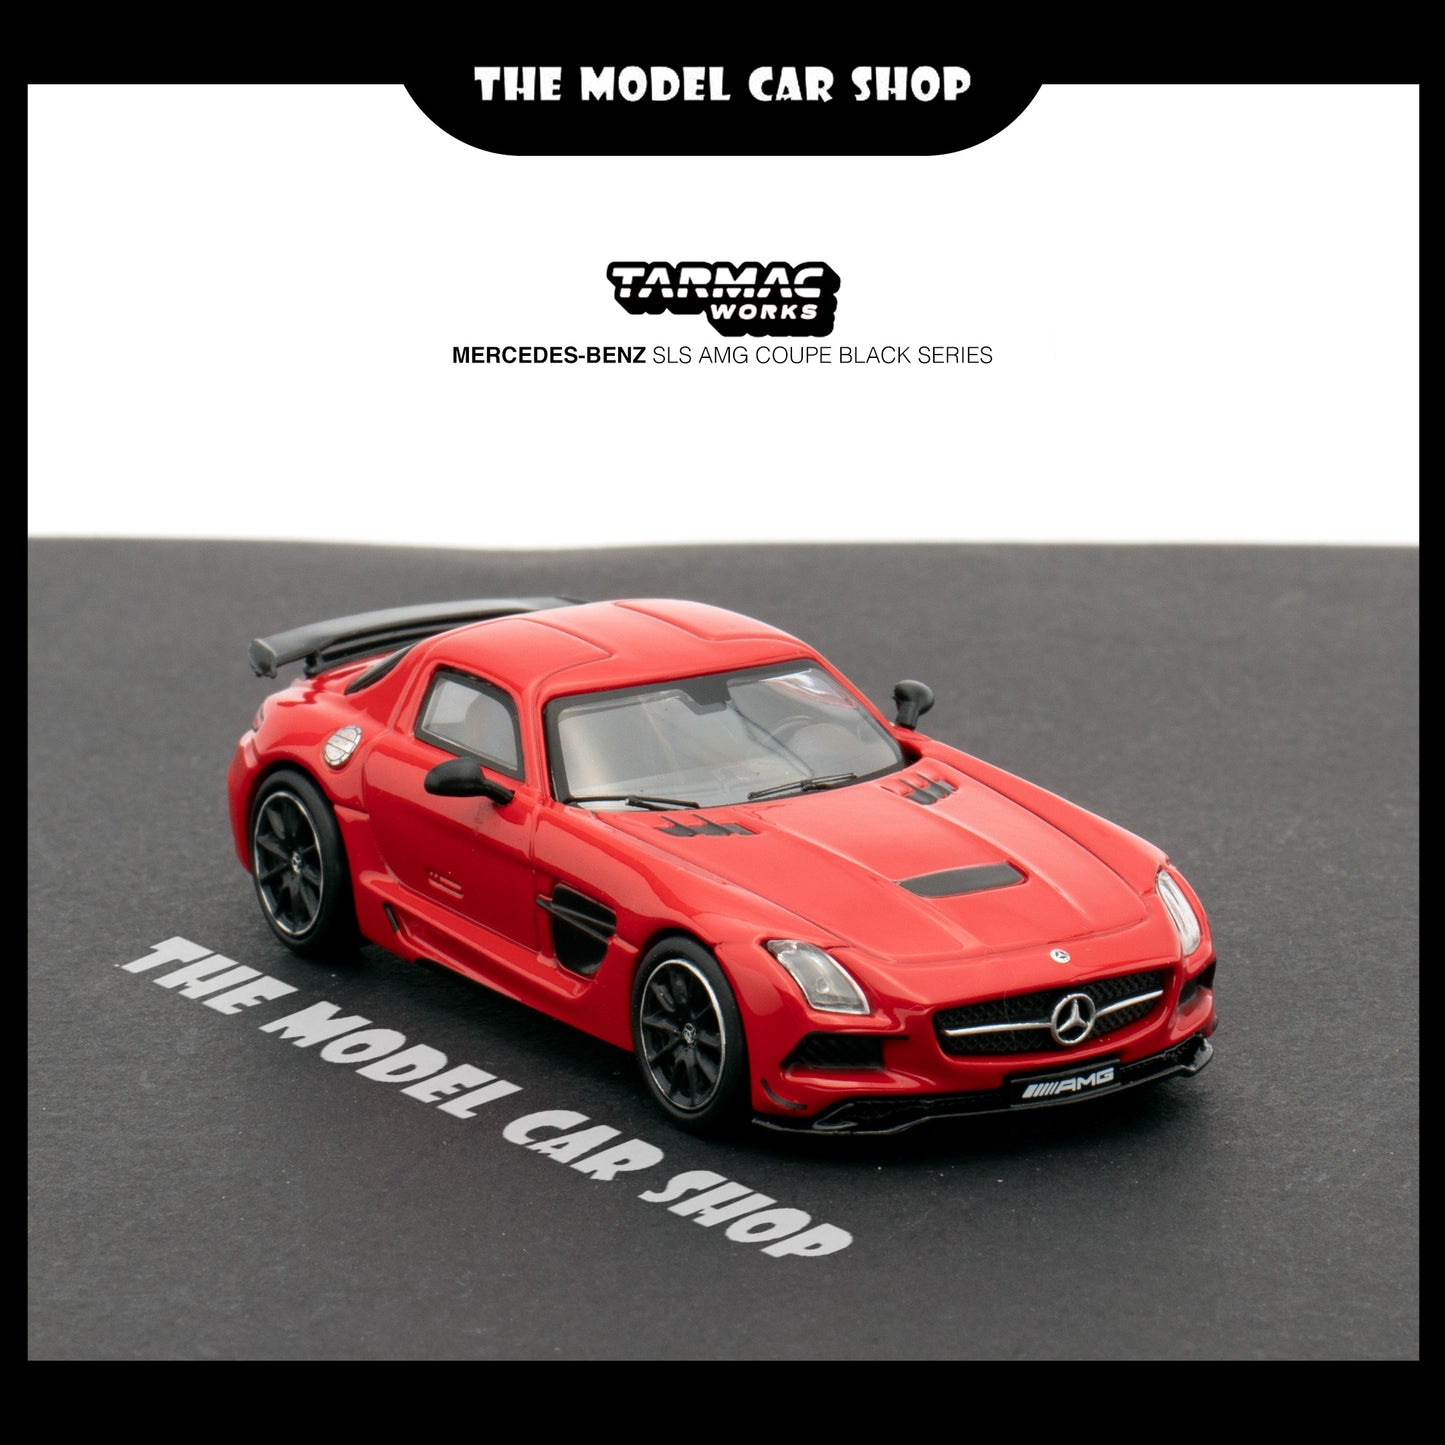 [Tarmac Works] Mercedes-Benz SLS AMG Coupe Black Series - Red (China Exclusive)